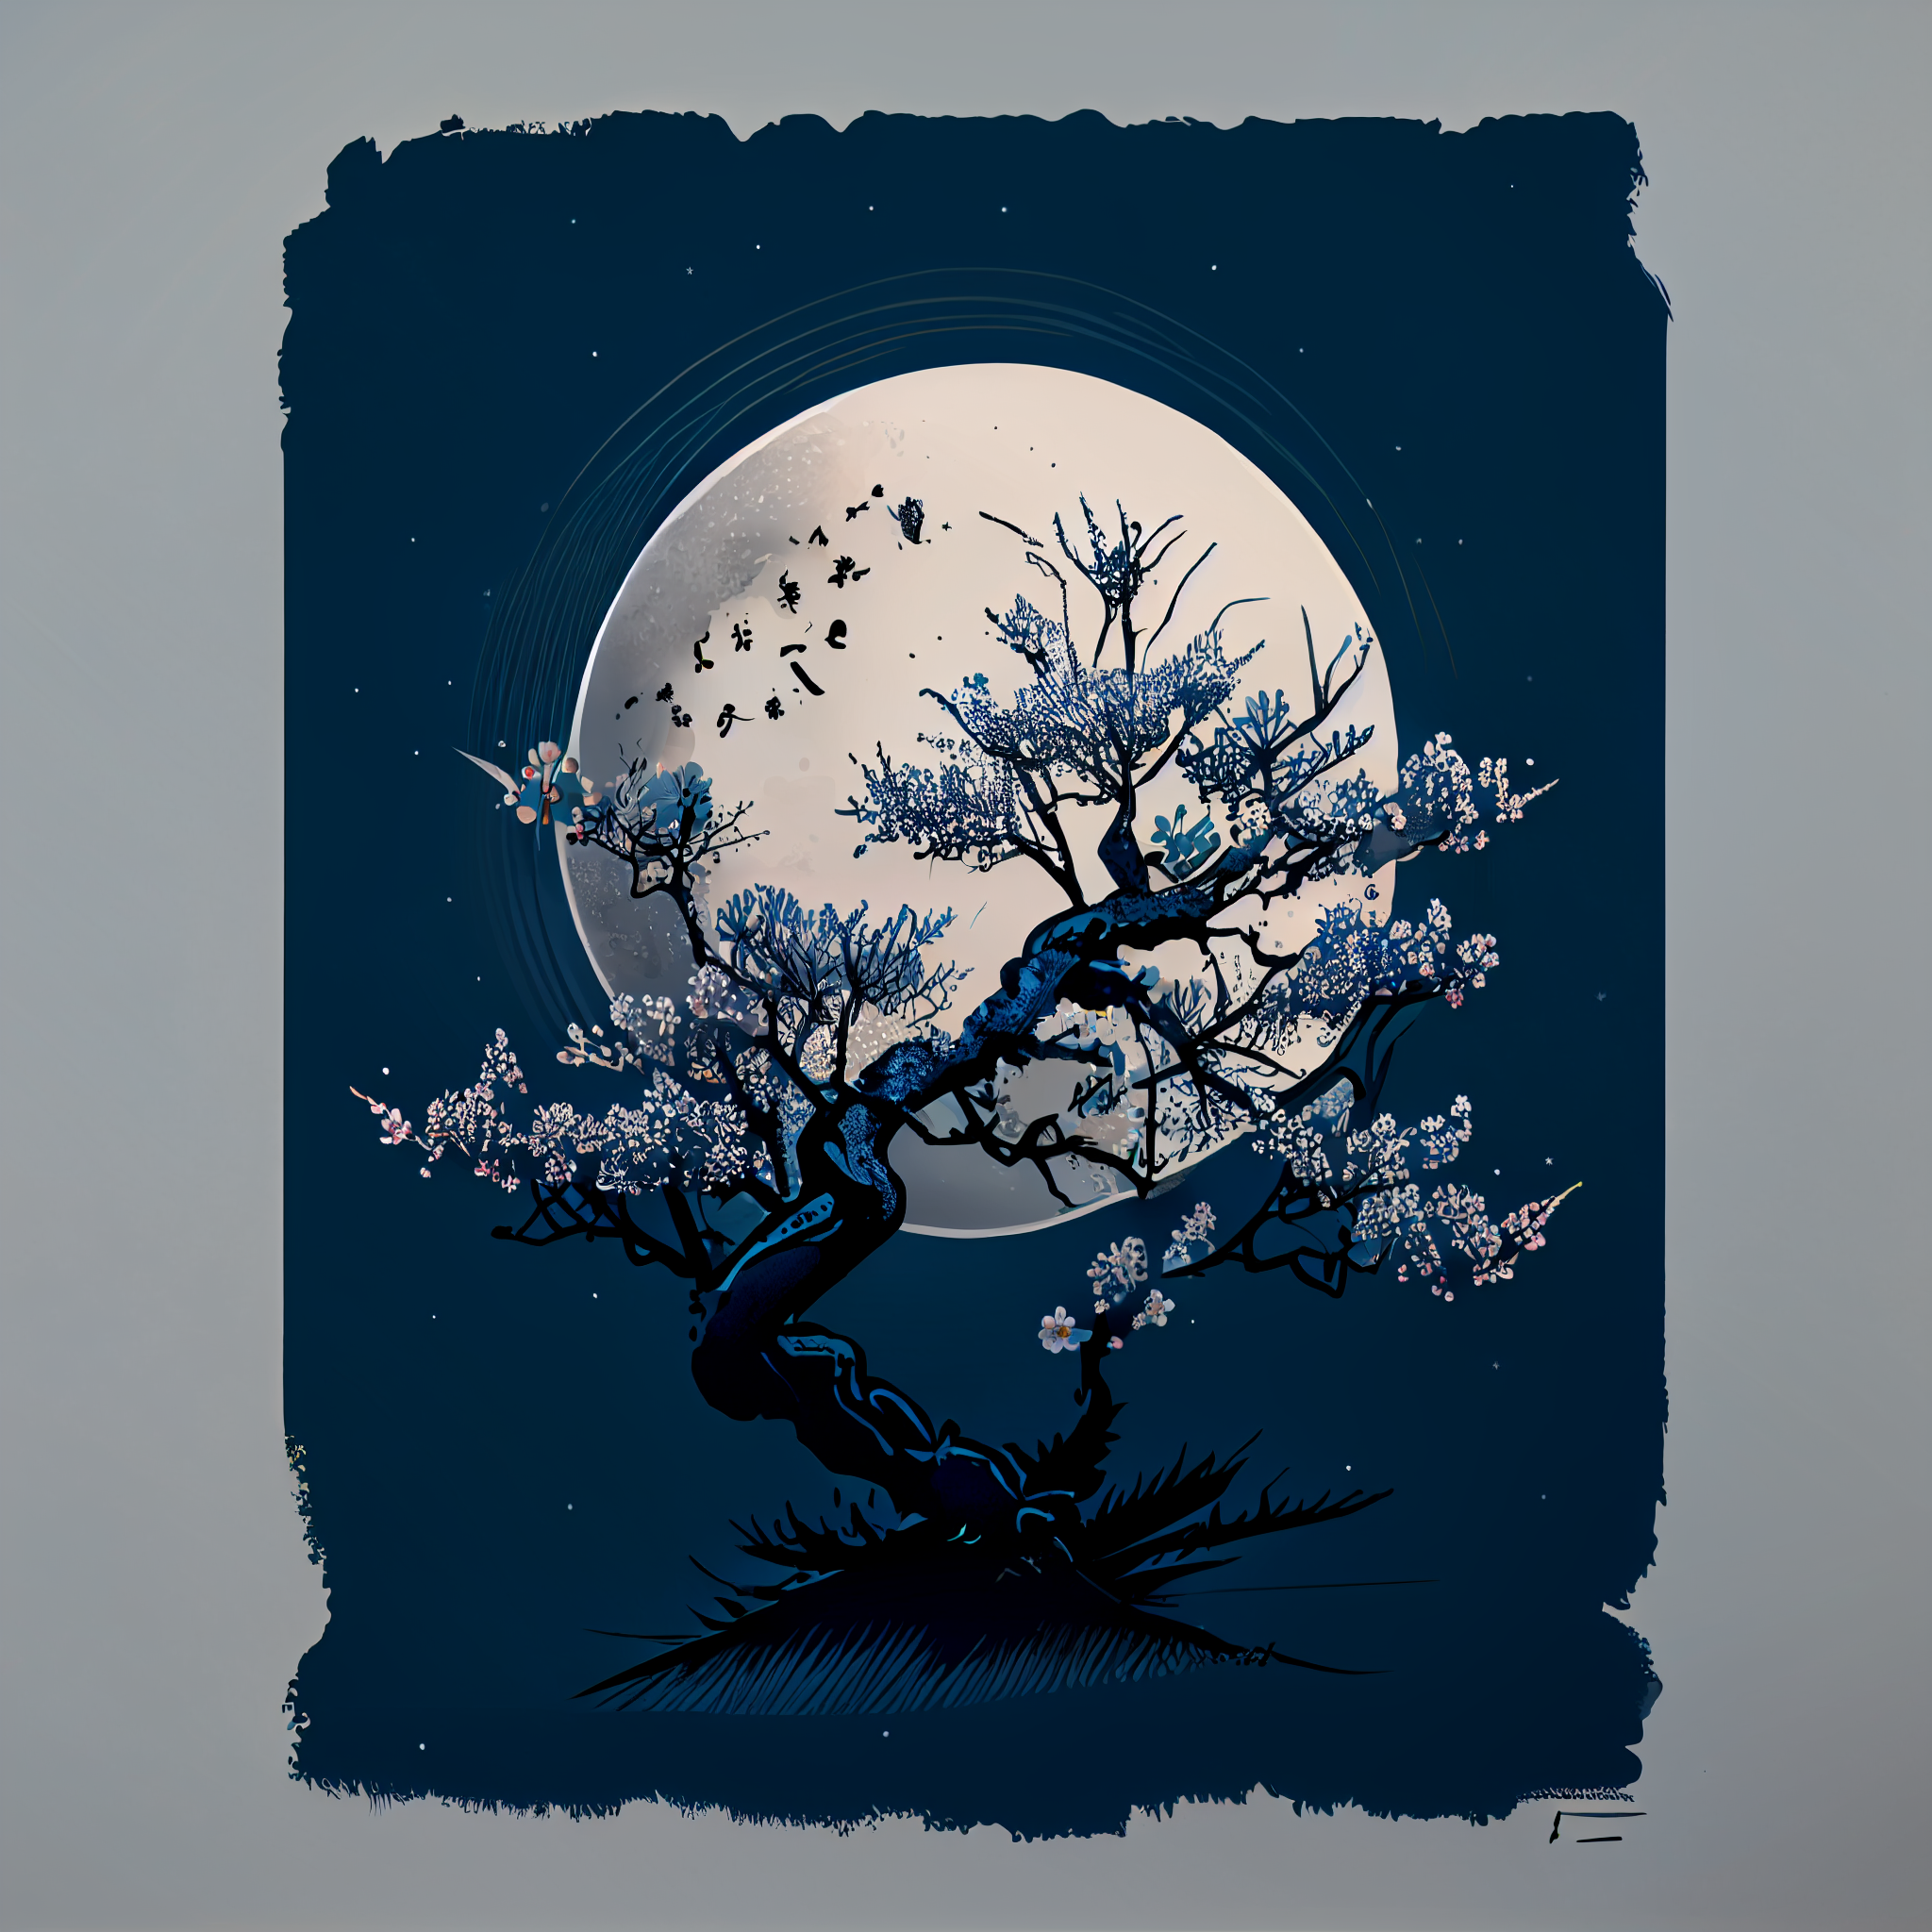 Midnight Bloom: An Ink Art Print of a Cherry Blossom Tree in Blue on a Grey Background with a Moon